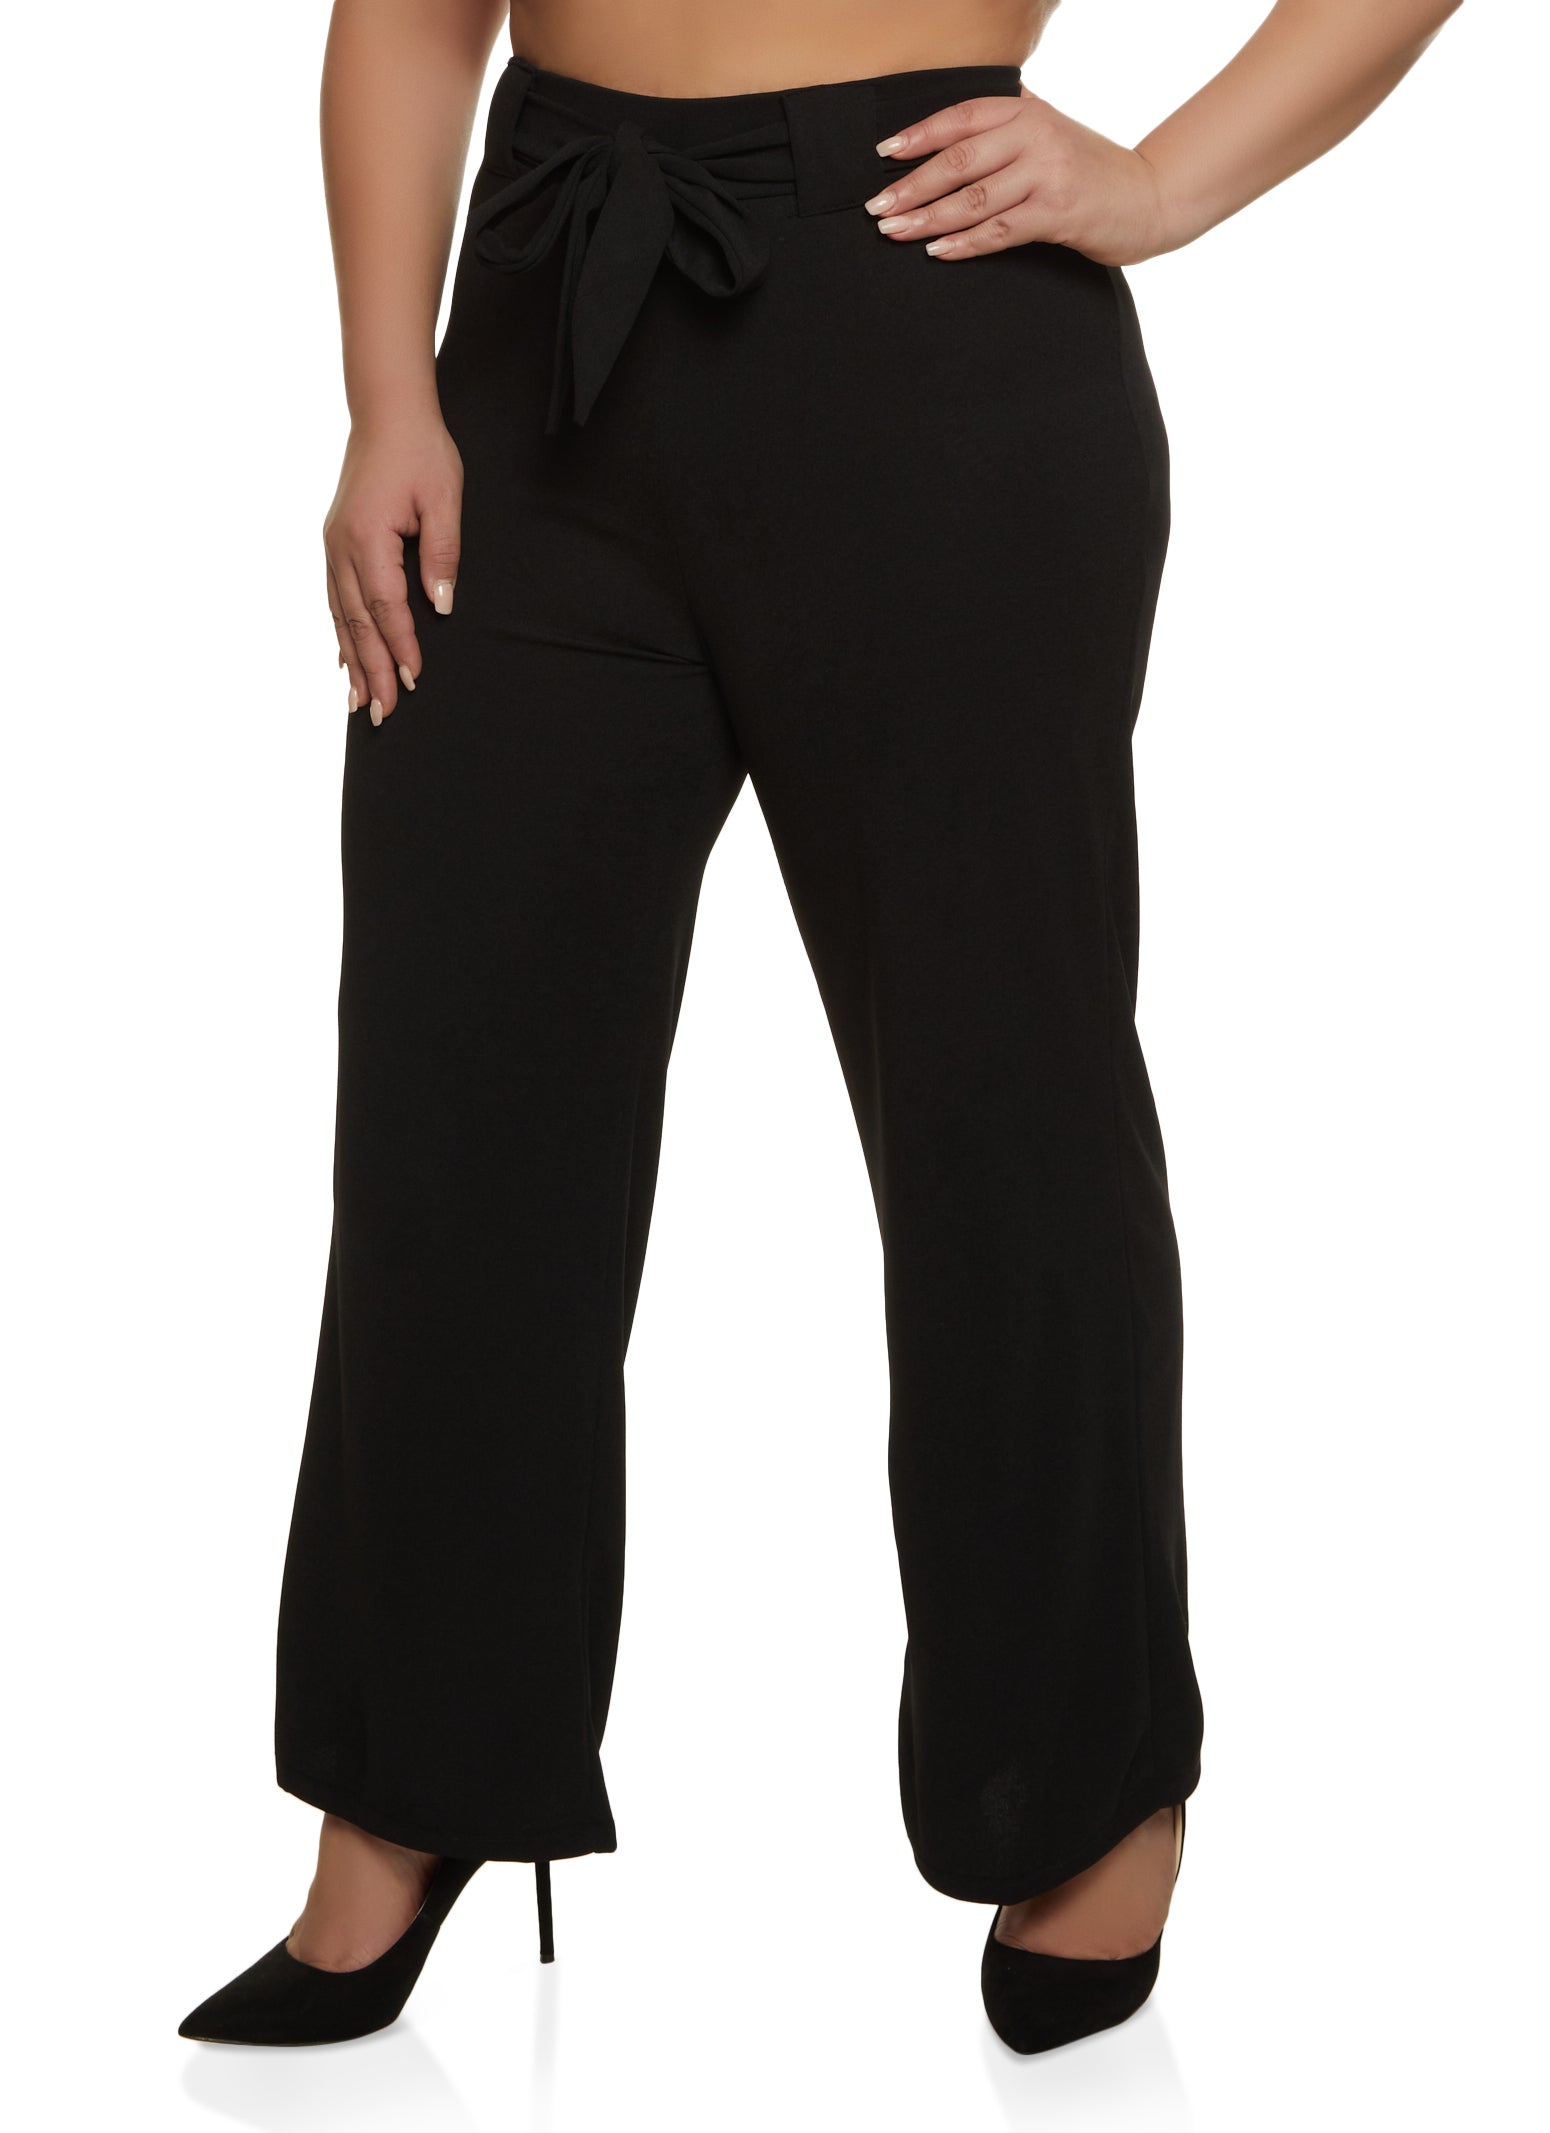 Plus-Size Finesse Crepe Front Zip Ankle Length Pant | Lafayette 148 New York